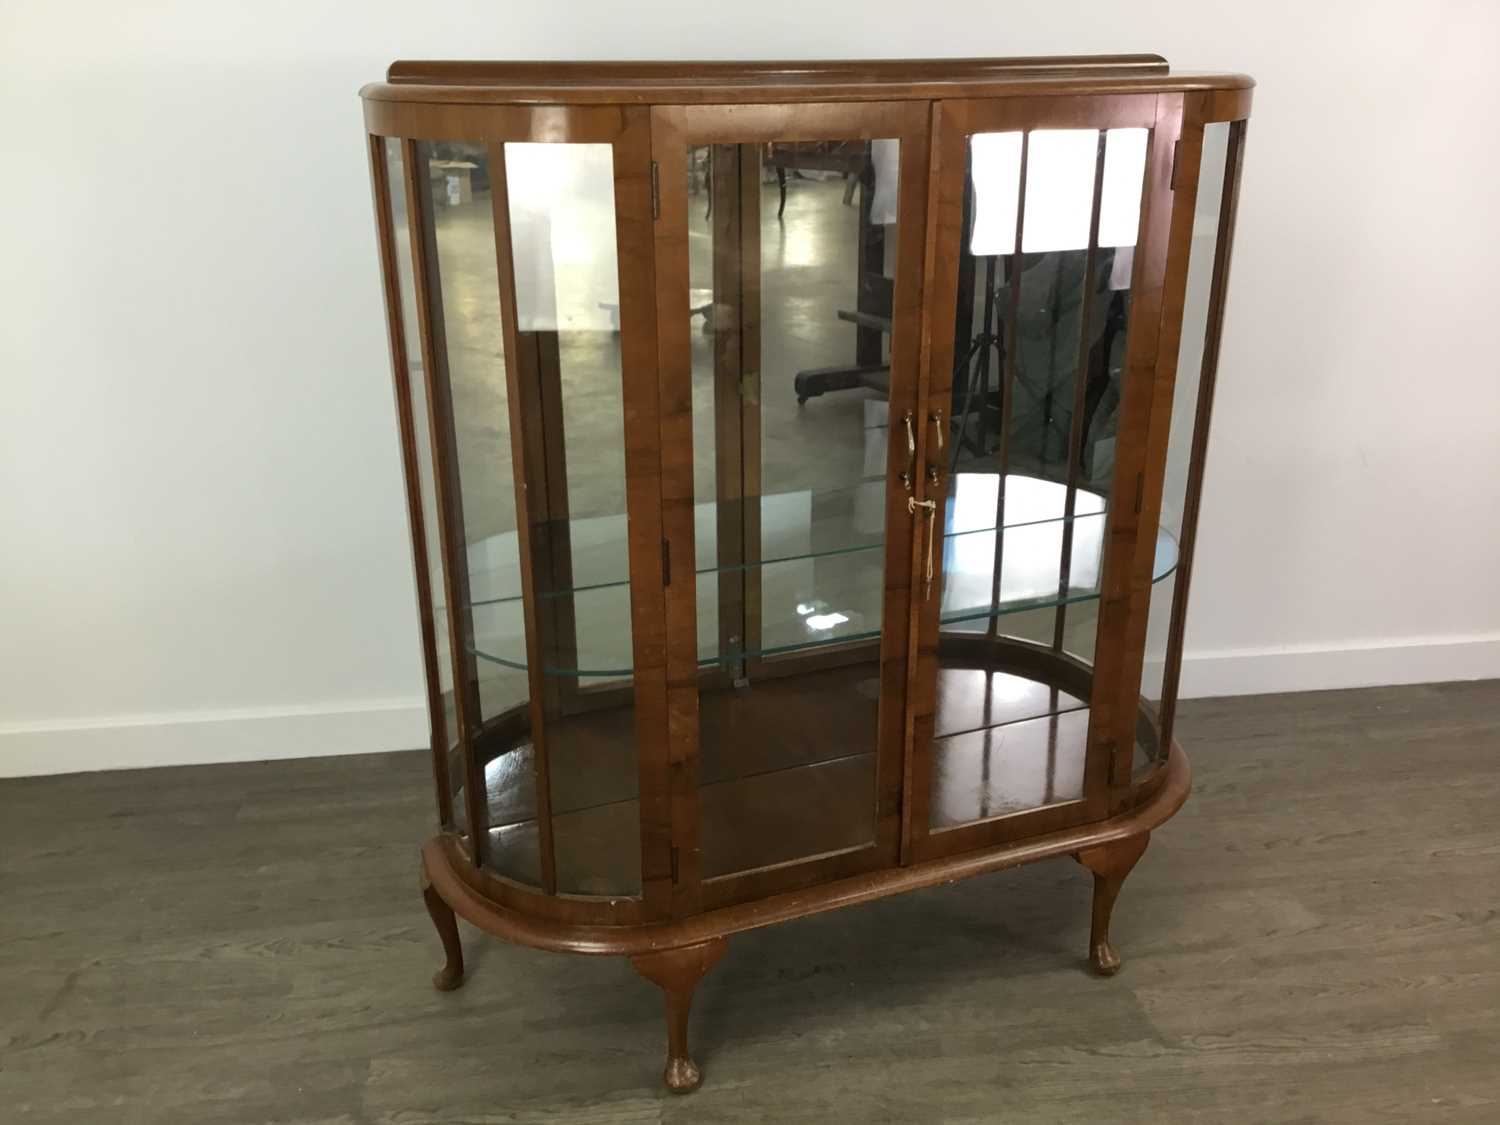 Lot 275 - AN EARLY 20TH CENTURY DISPLAY CABINET